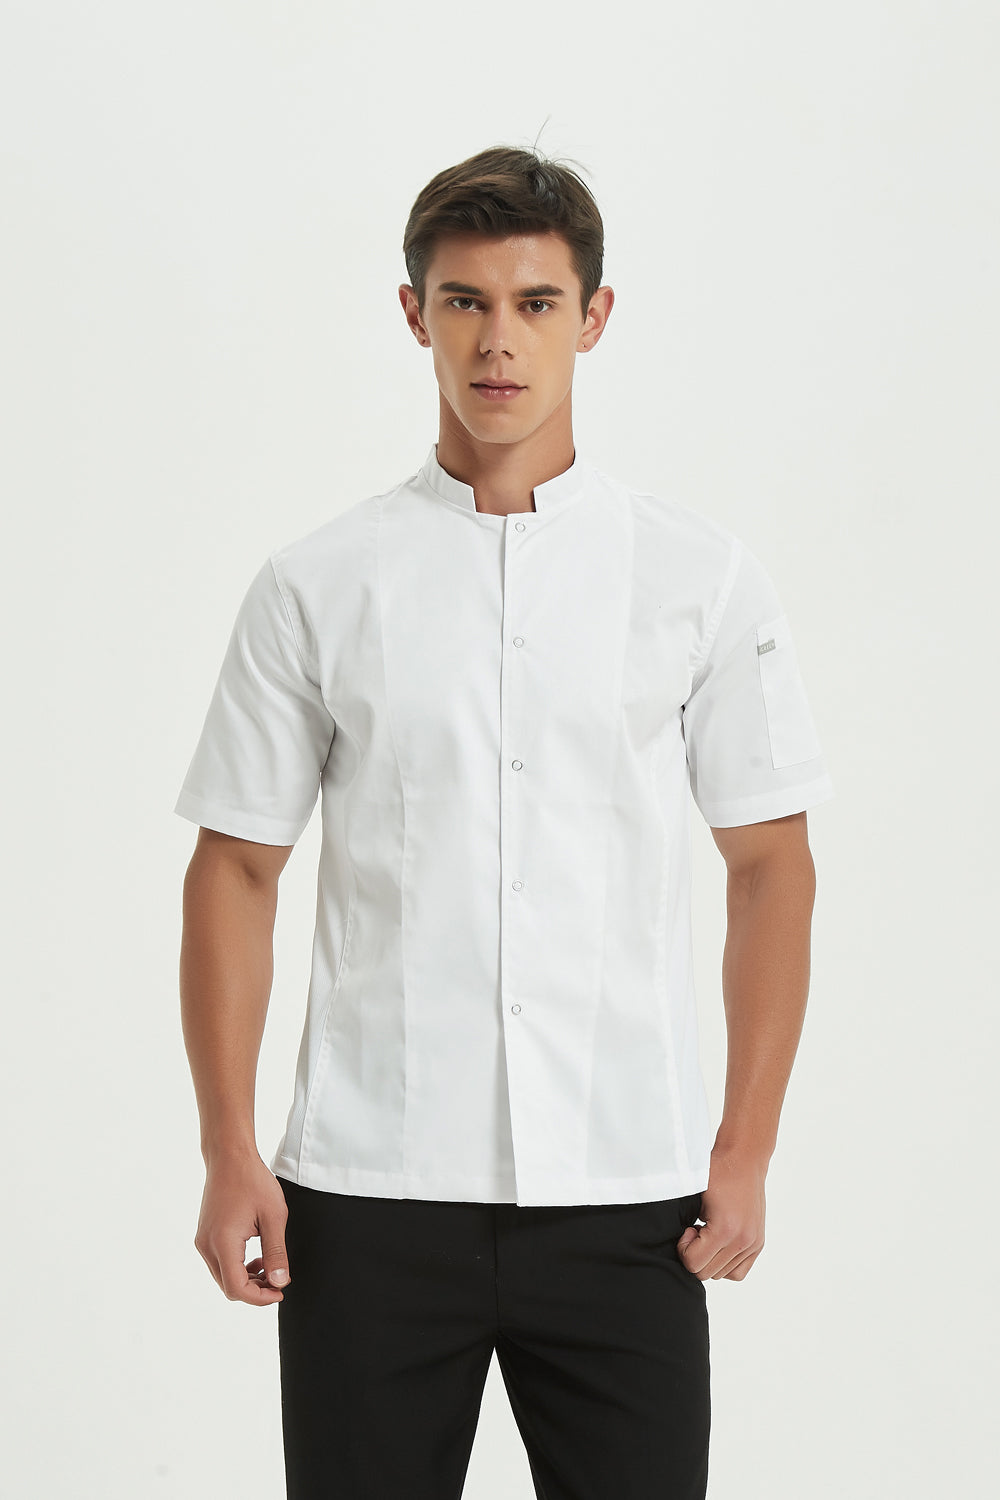 Mint White Chef Jacket with Dri-fit, Front View